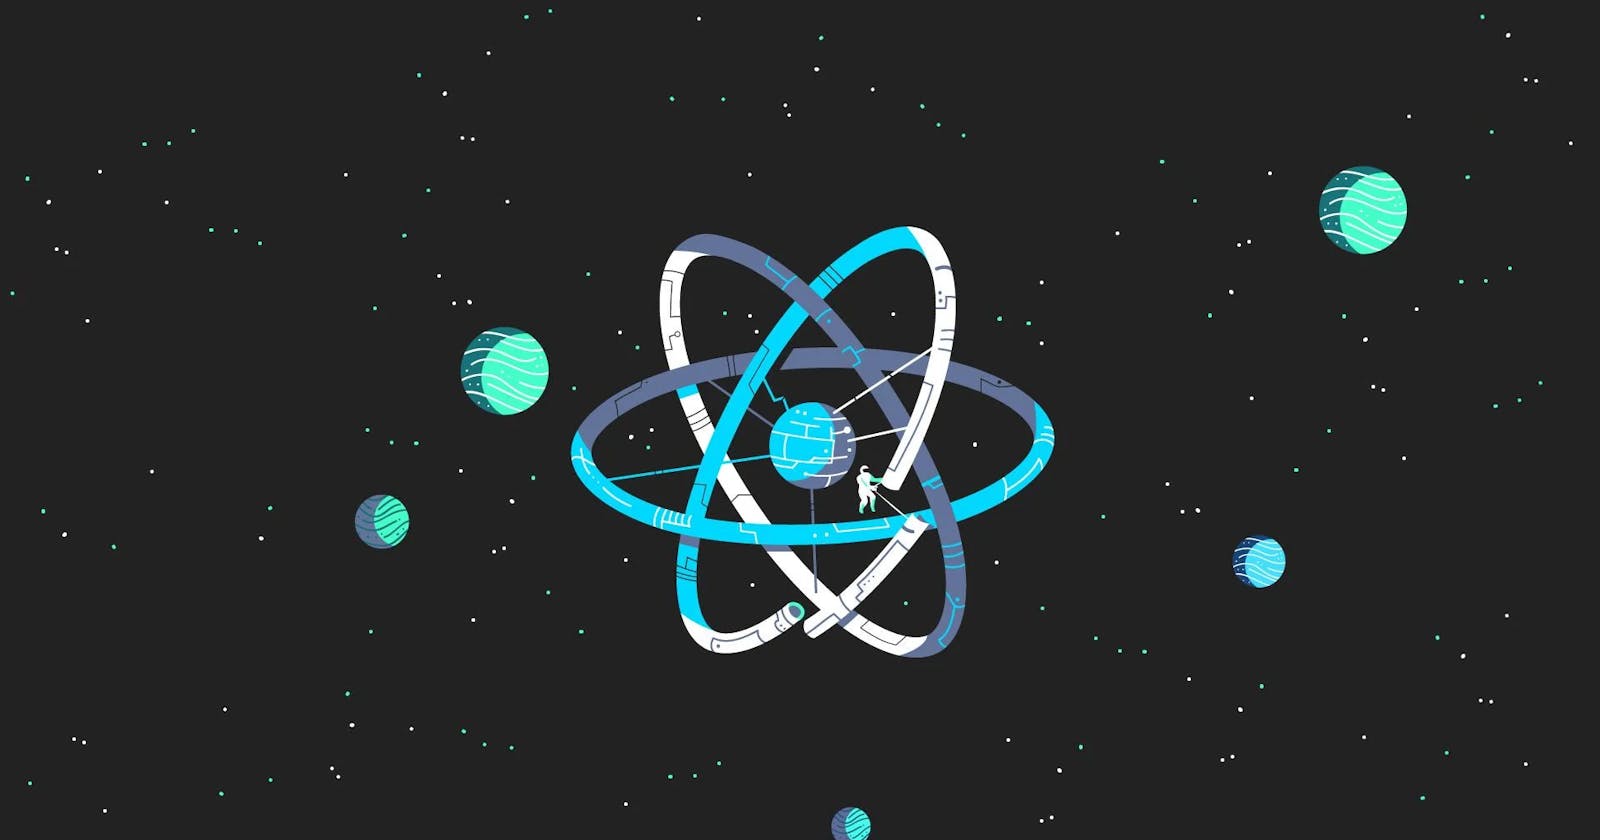 Getting Started with React: Understanding Ternary Operators, Lists, and Styling in react